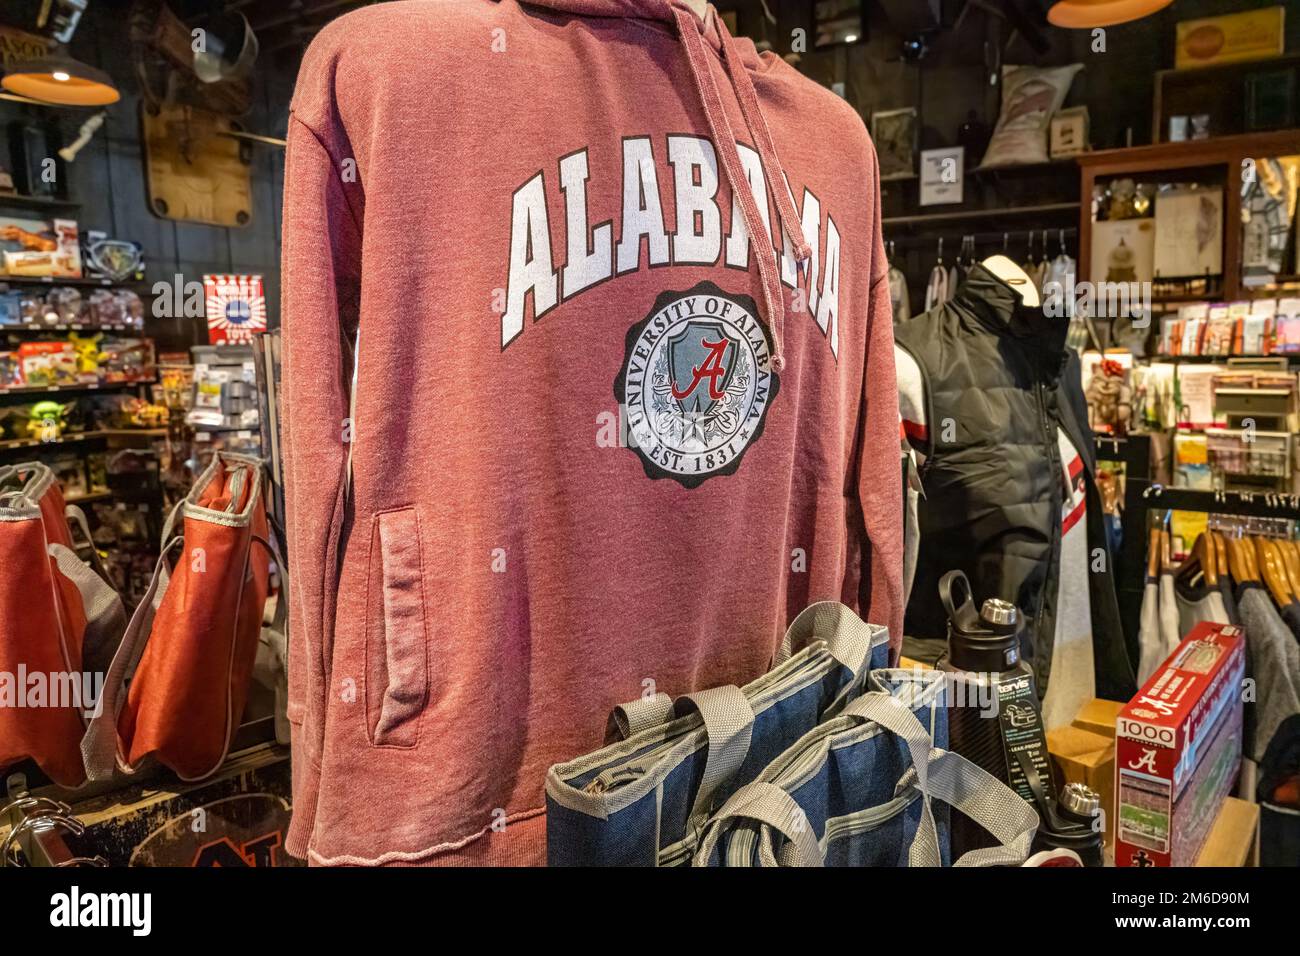 University of Alabama merchandise at the Cracker Barrel Old Country Store in Jasper, Alabama. (USA) Stock Photo